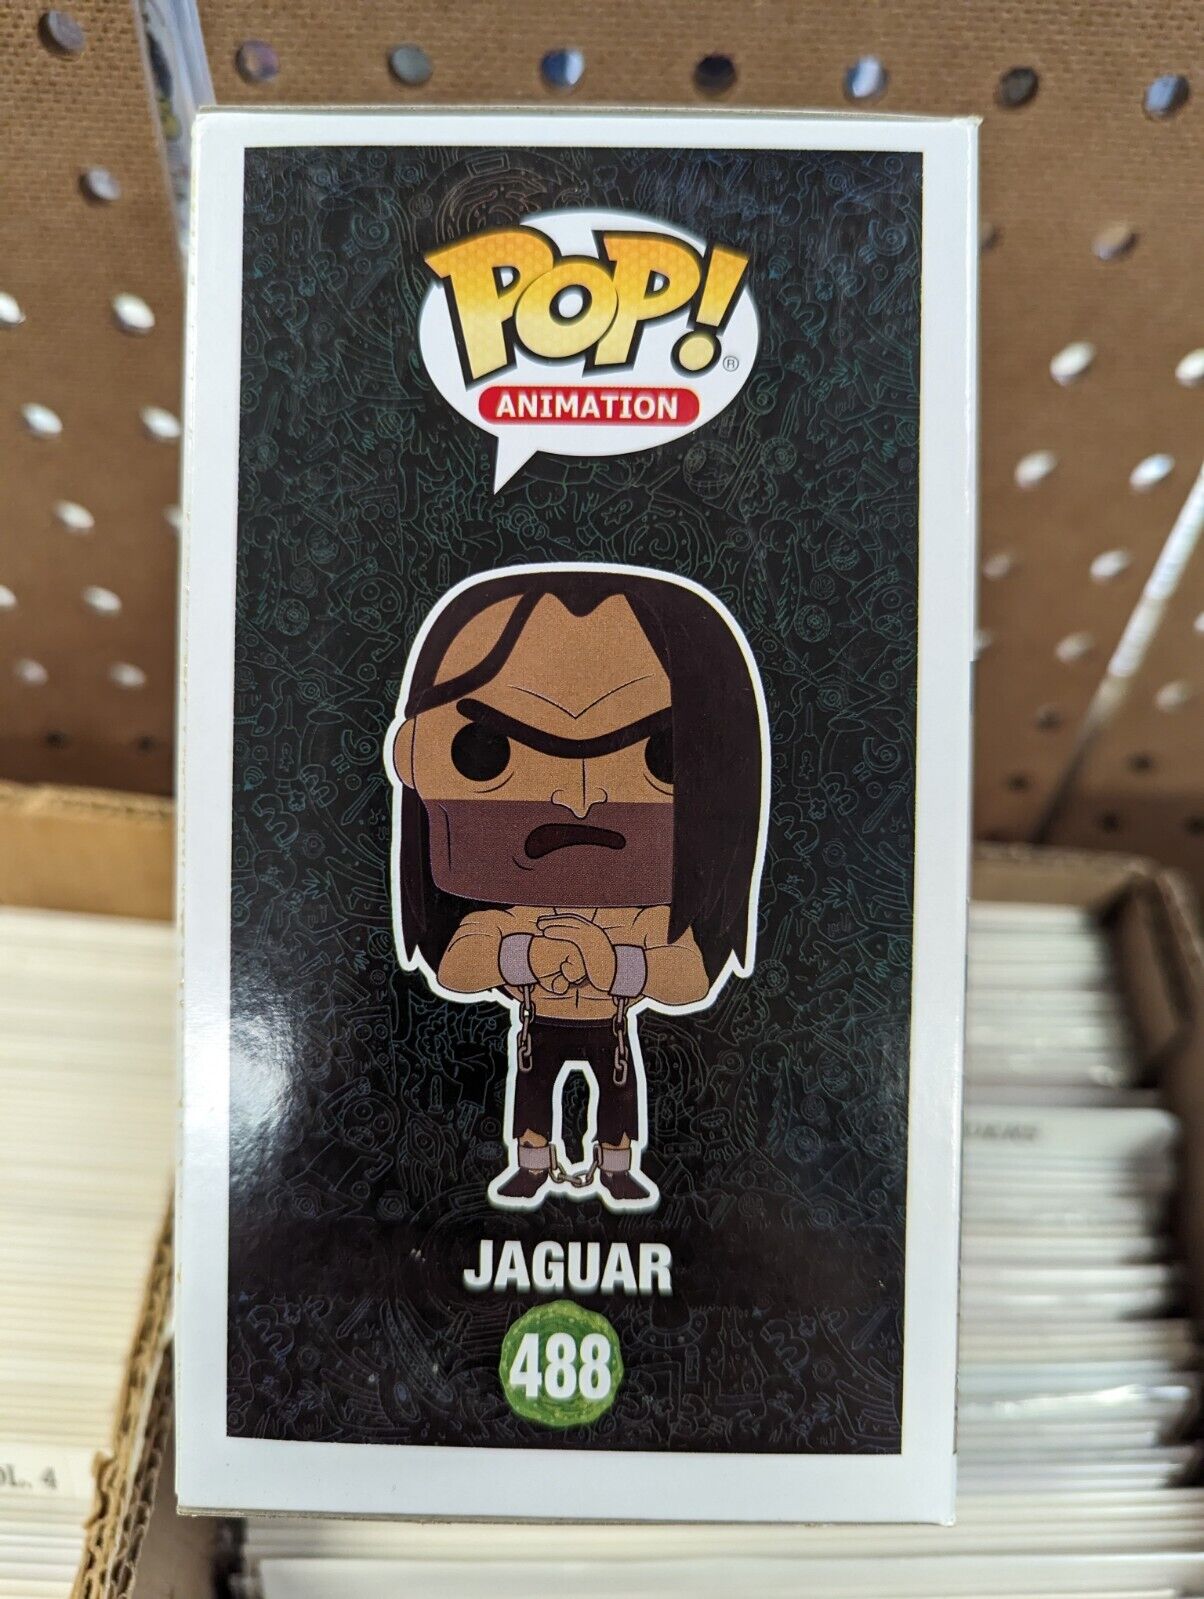 Funko Pop Jaguar 488 Rick And Morty 2019 Spring Convention